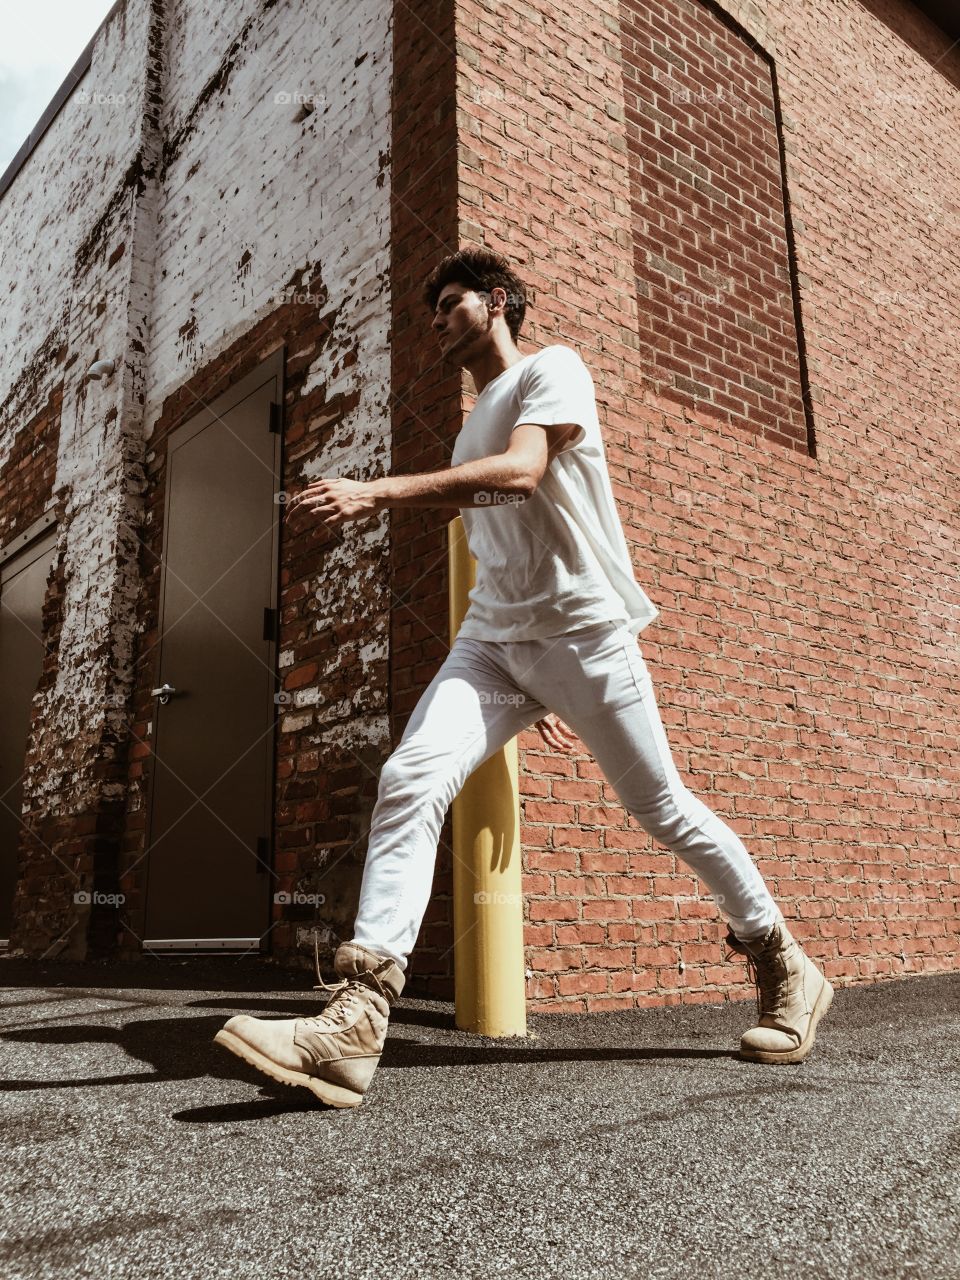 A young man walking down the street wearing white clothes.  Cool, urban city vibe.